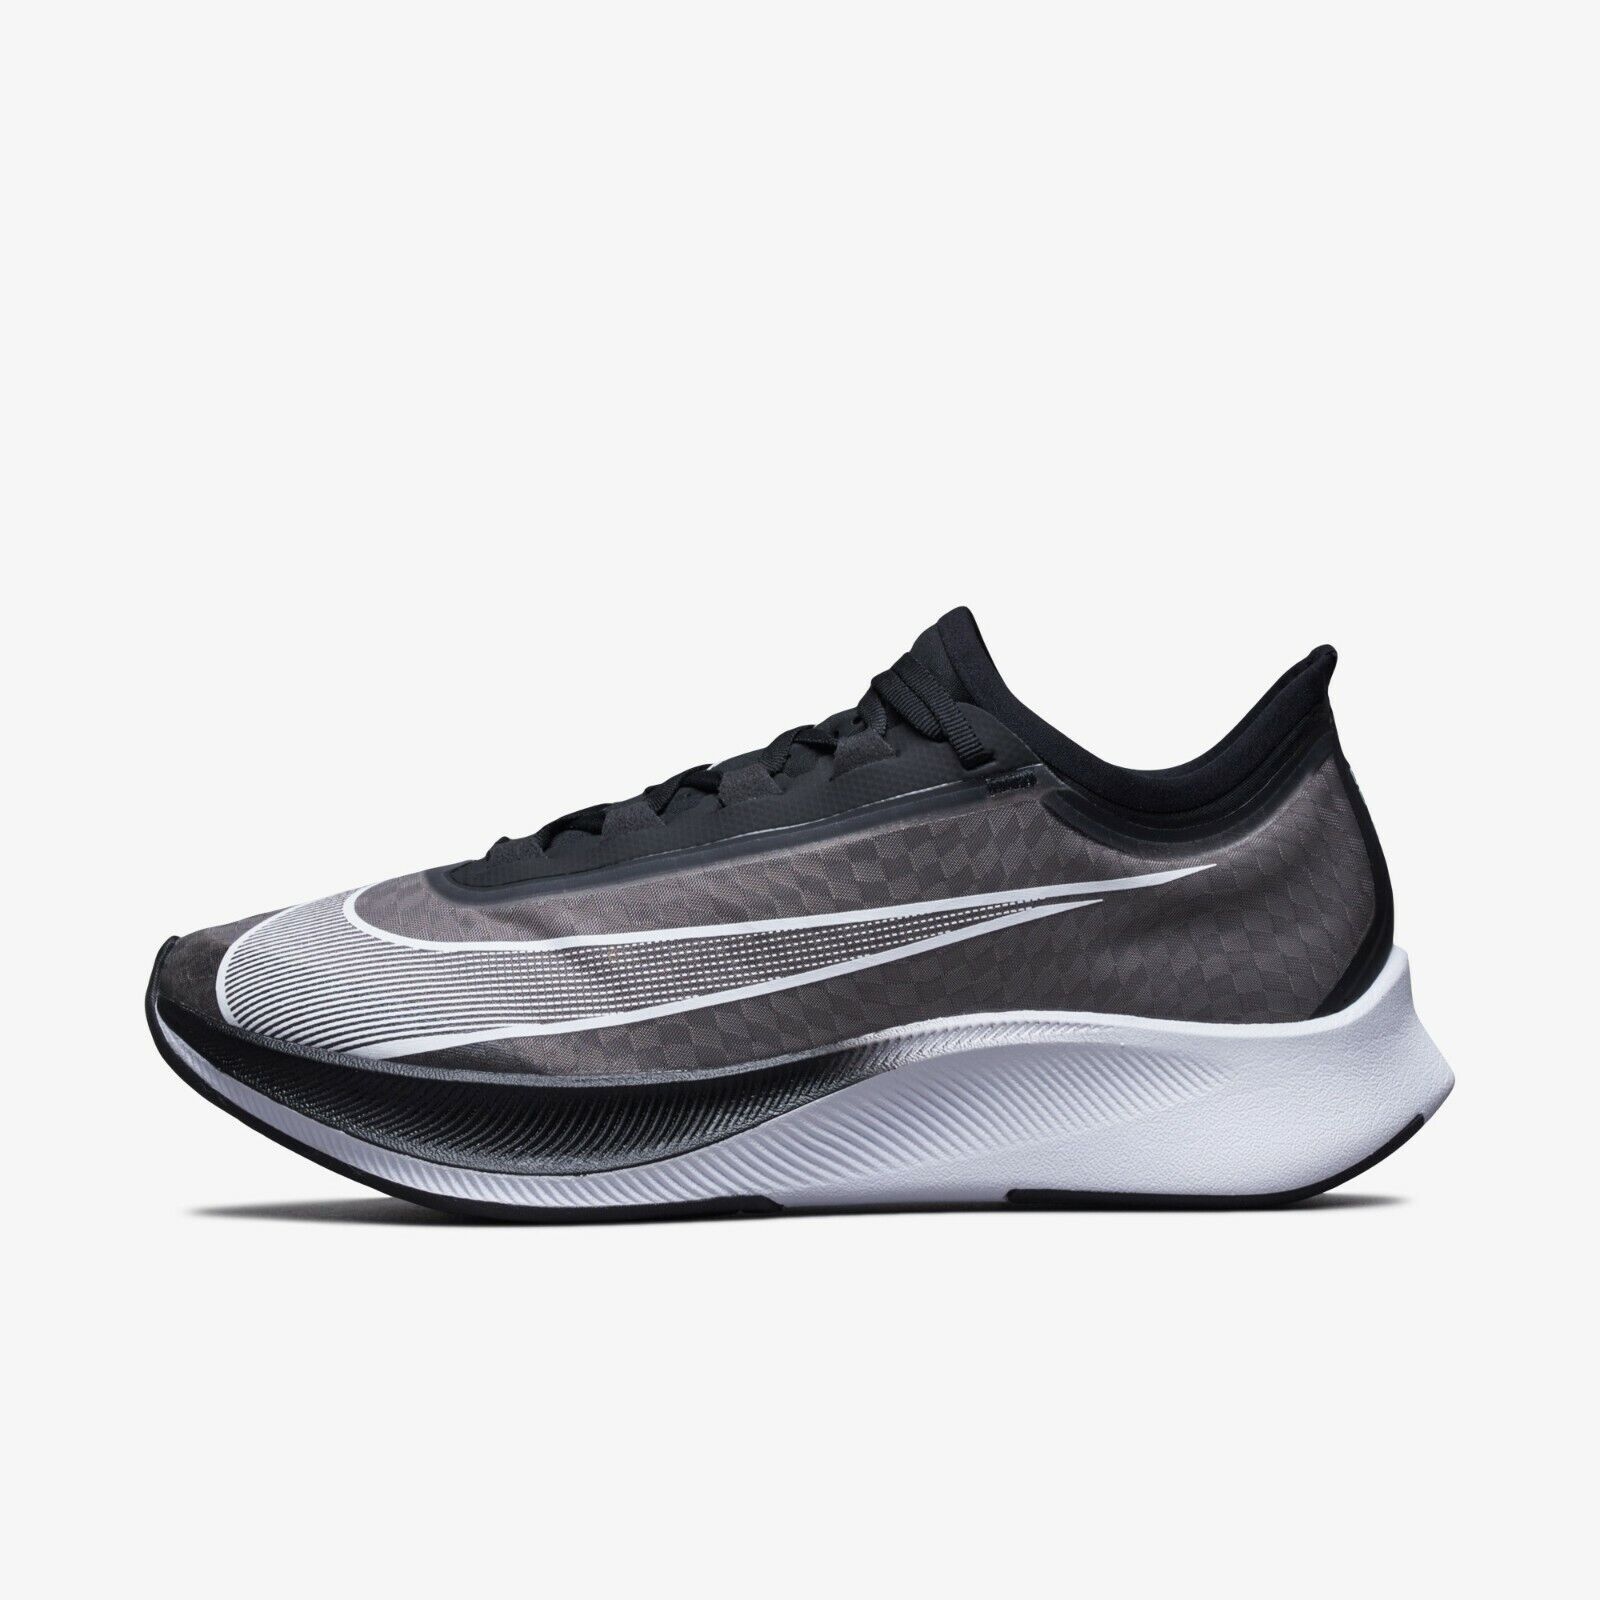 Nike Zoom Fly 3 Shoes Men's Running Sneakers Black/White/Volt AT8240 ...